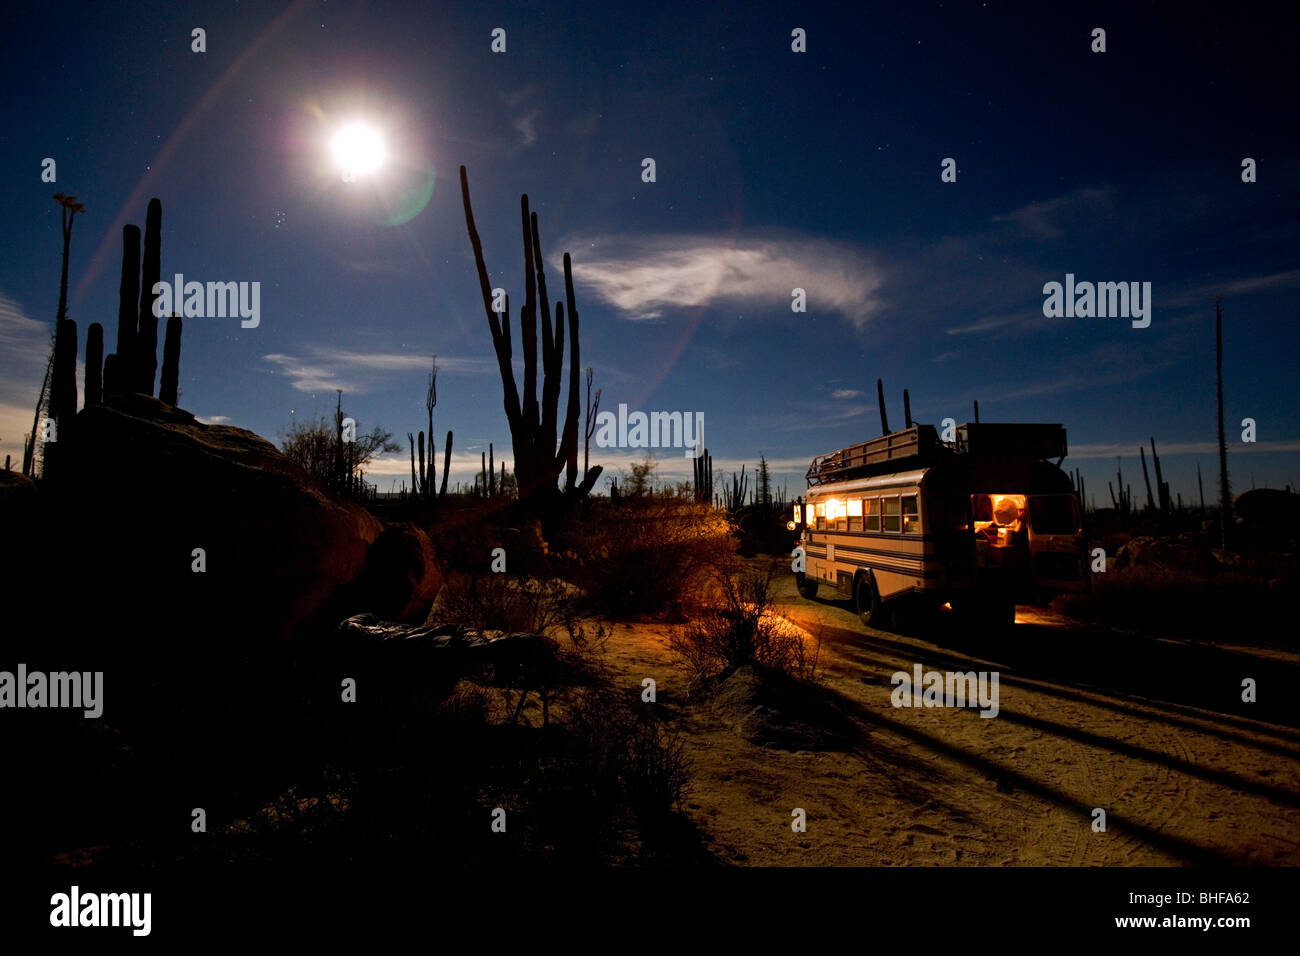 An American Schoolbus parked at night in the desert full of cactuses, fullmoon and starry sky, Catavina, Baja California Norte, Stock Photo